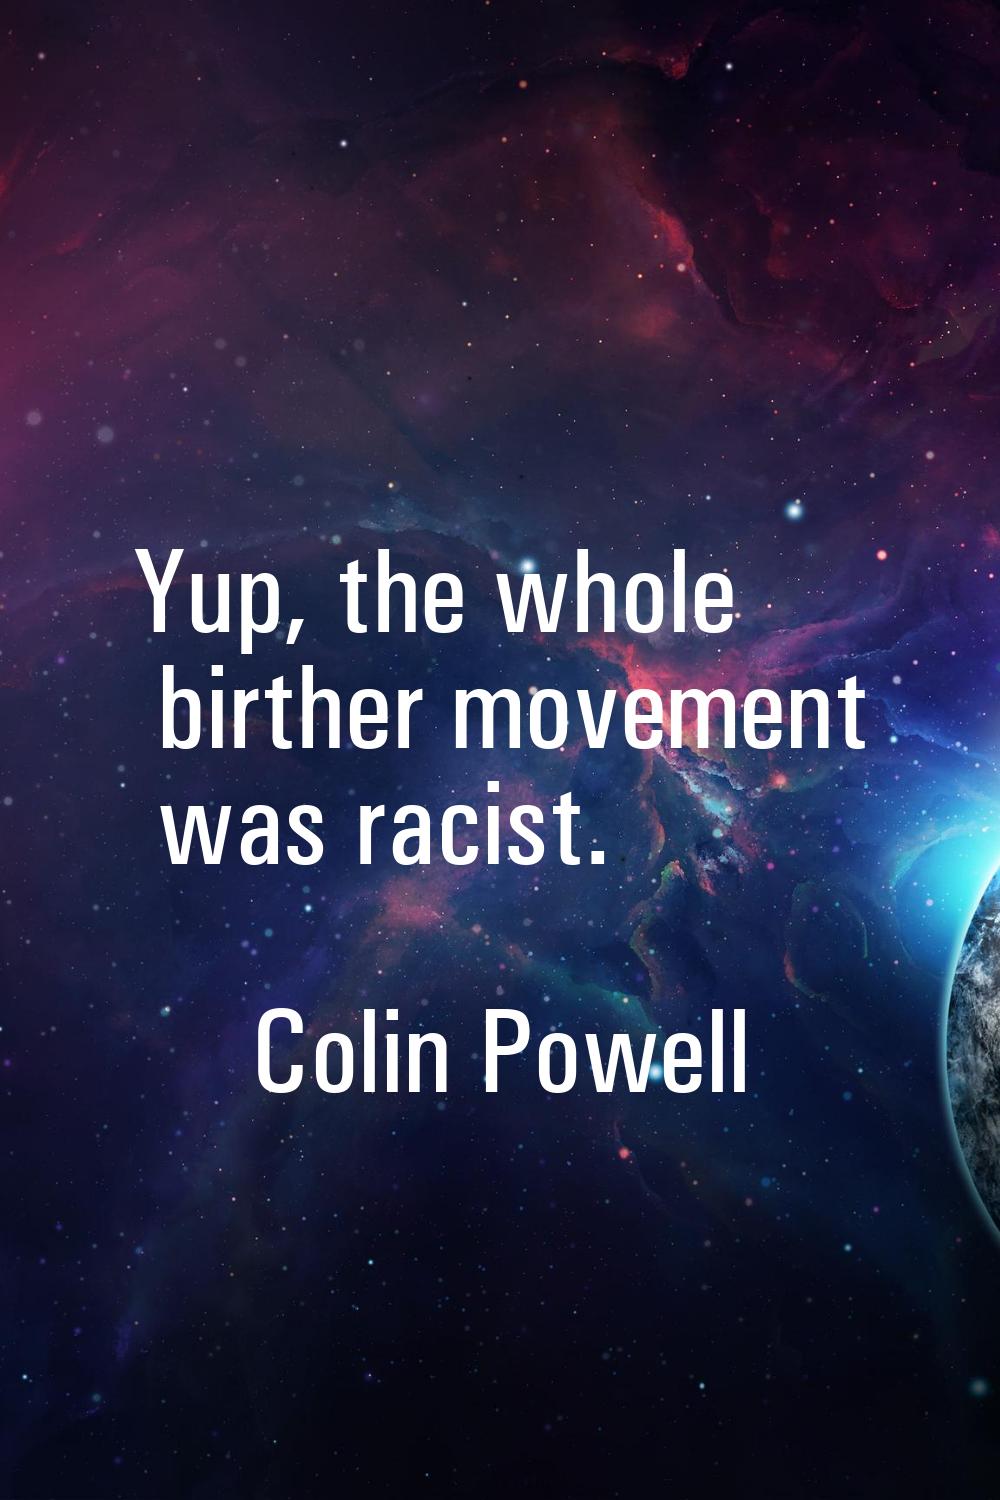 Yup, the whole birther movement was racist.